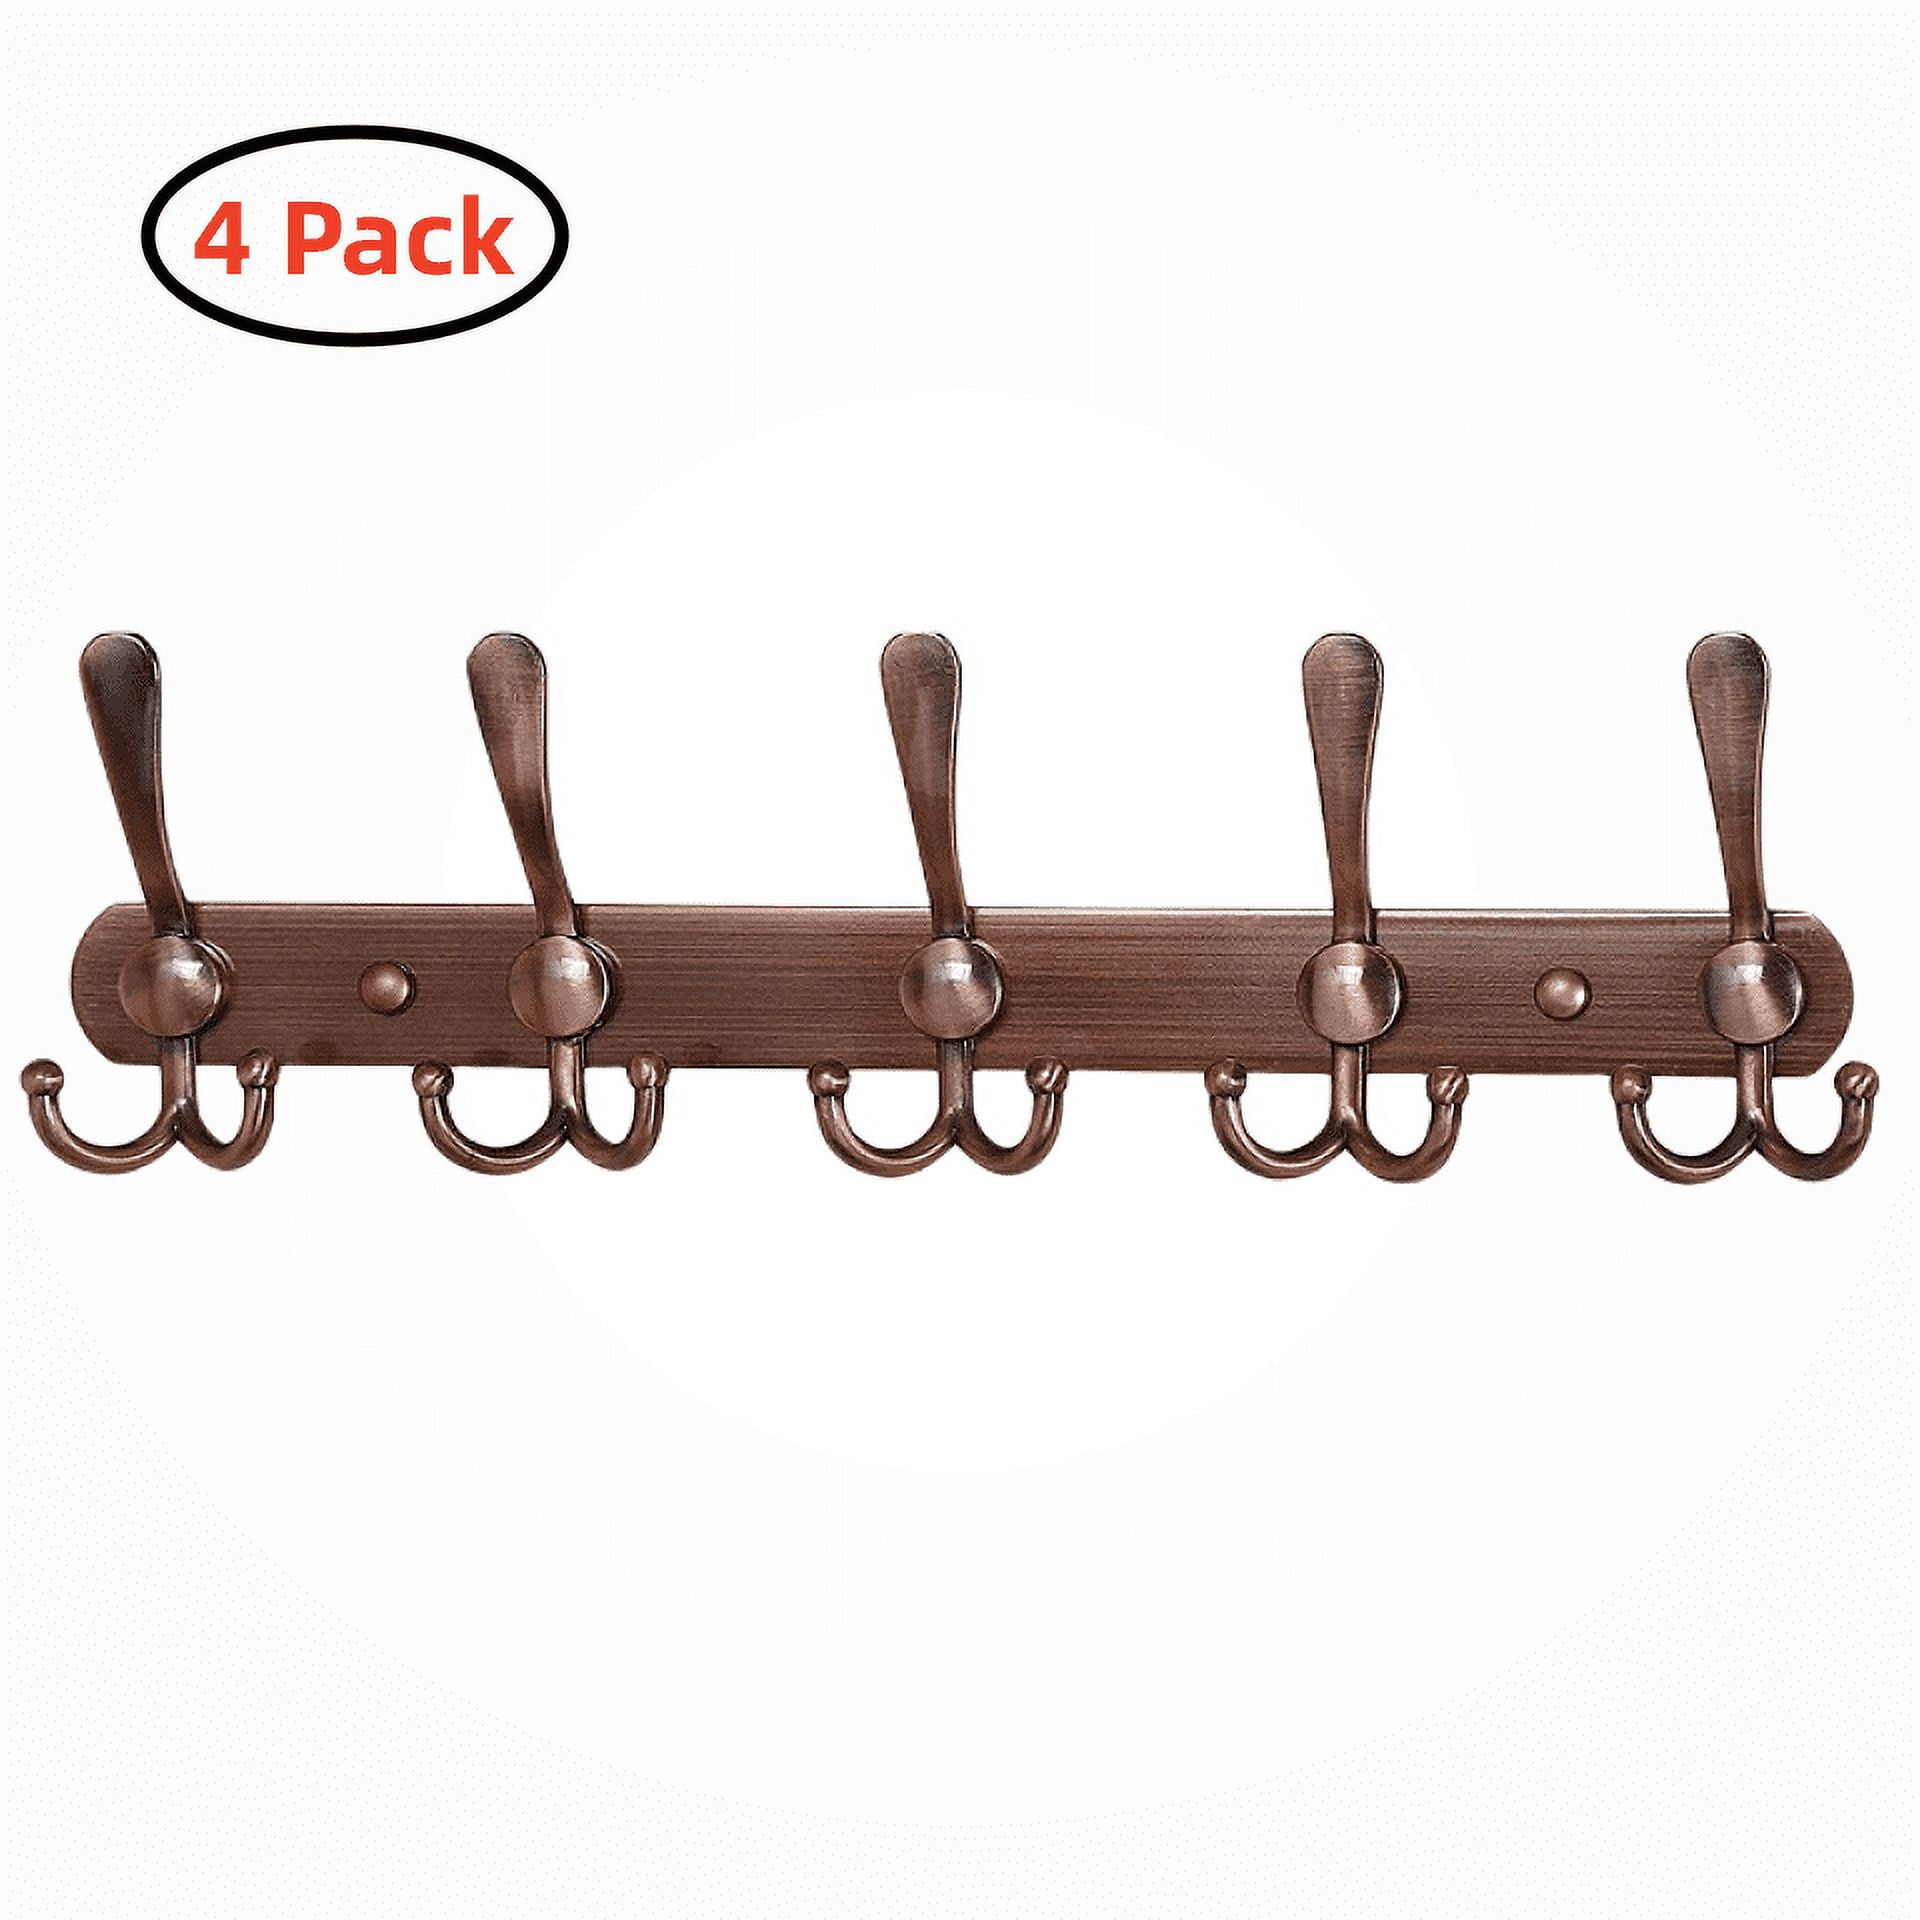 4 Pack Coat Rack Wall Mount-Stainless Steel Coat Rack - Heavy Duty Coat  Hooks Wall Mounted - Coat Hanger for Hat Towel Purse Robes 